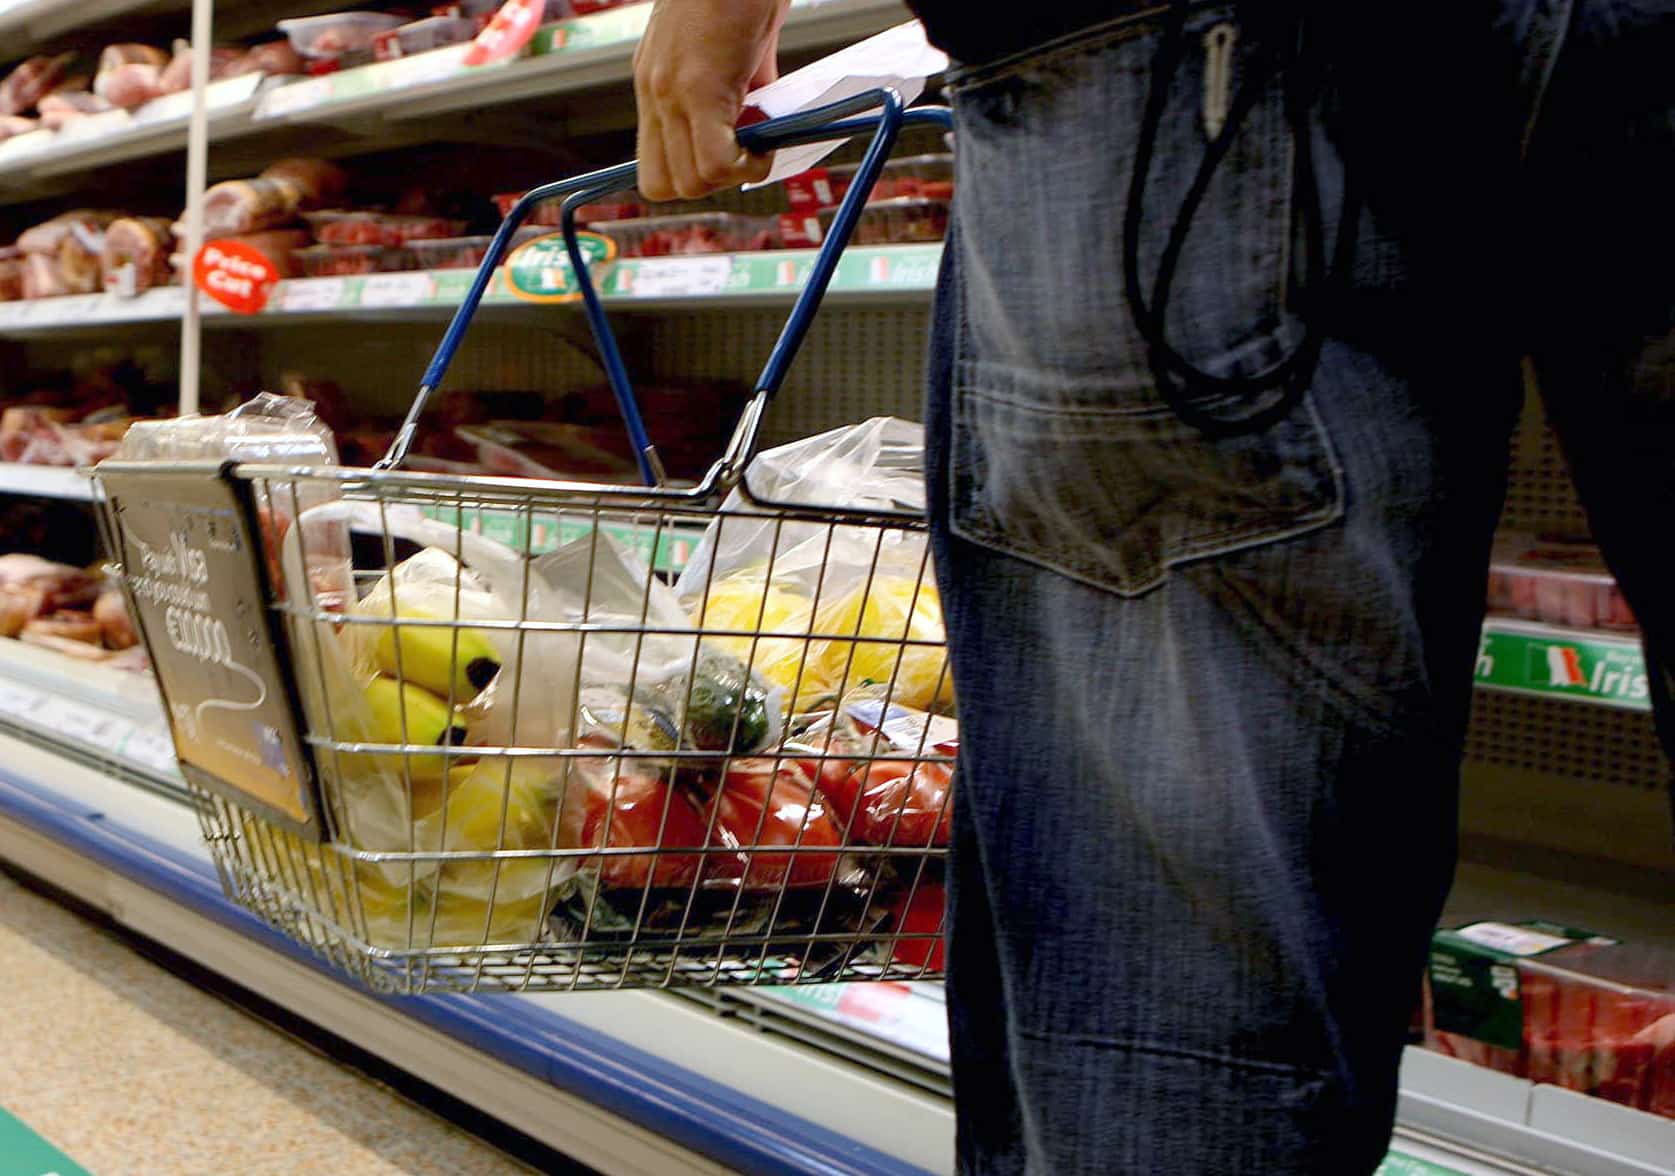 Brexit to blame for a third of Britain’s food bill rise